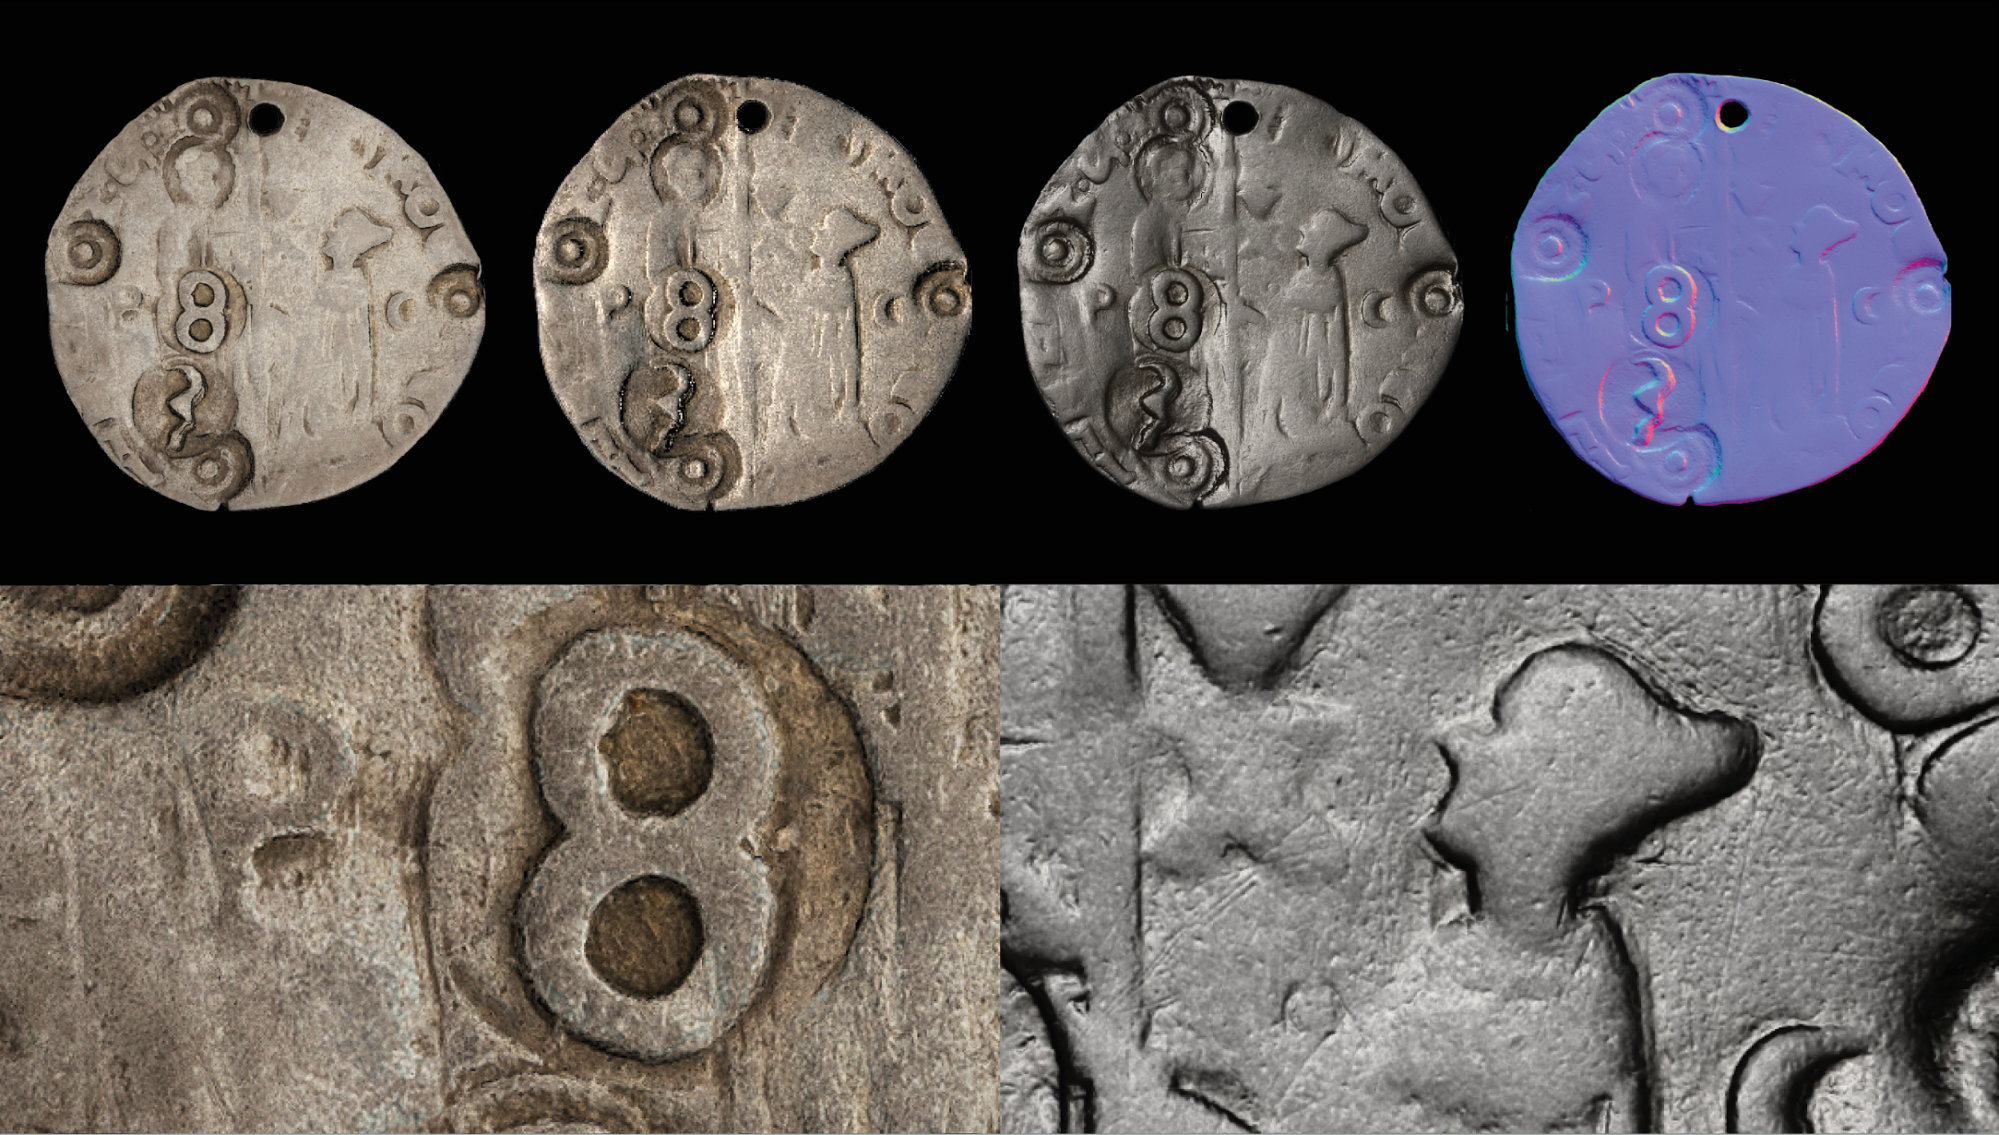 Medieval coins from the Bank of Cyprus Cultural Foundation collection